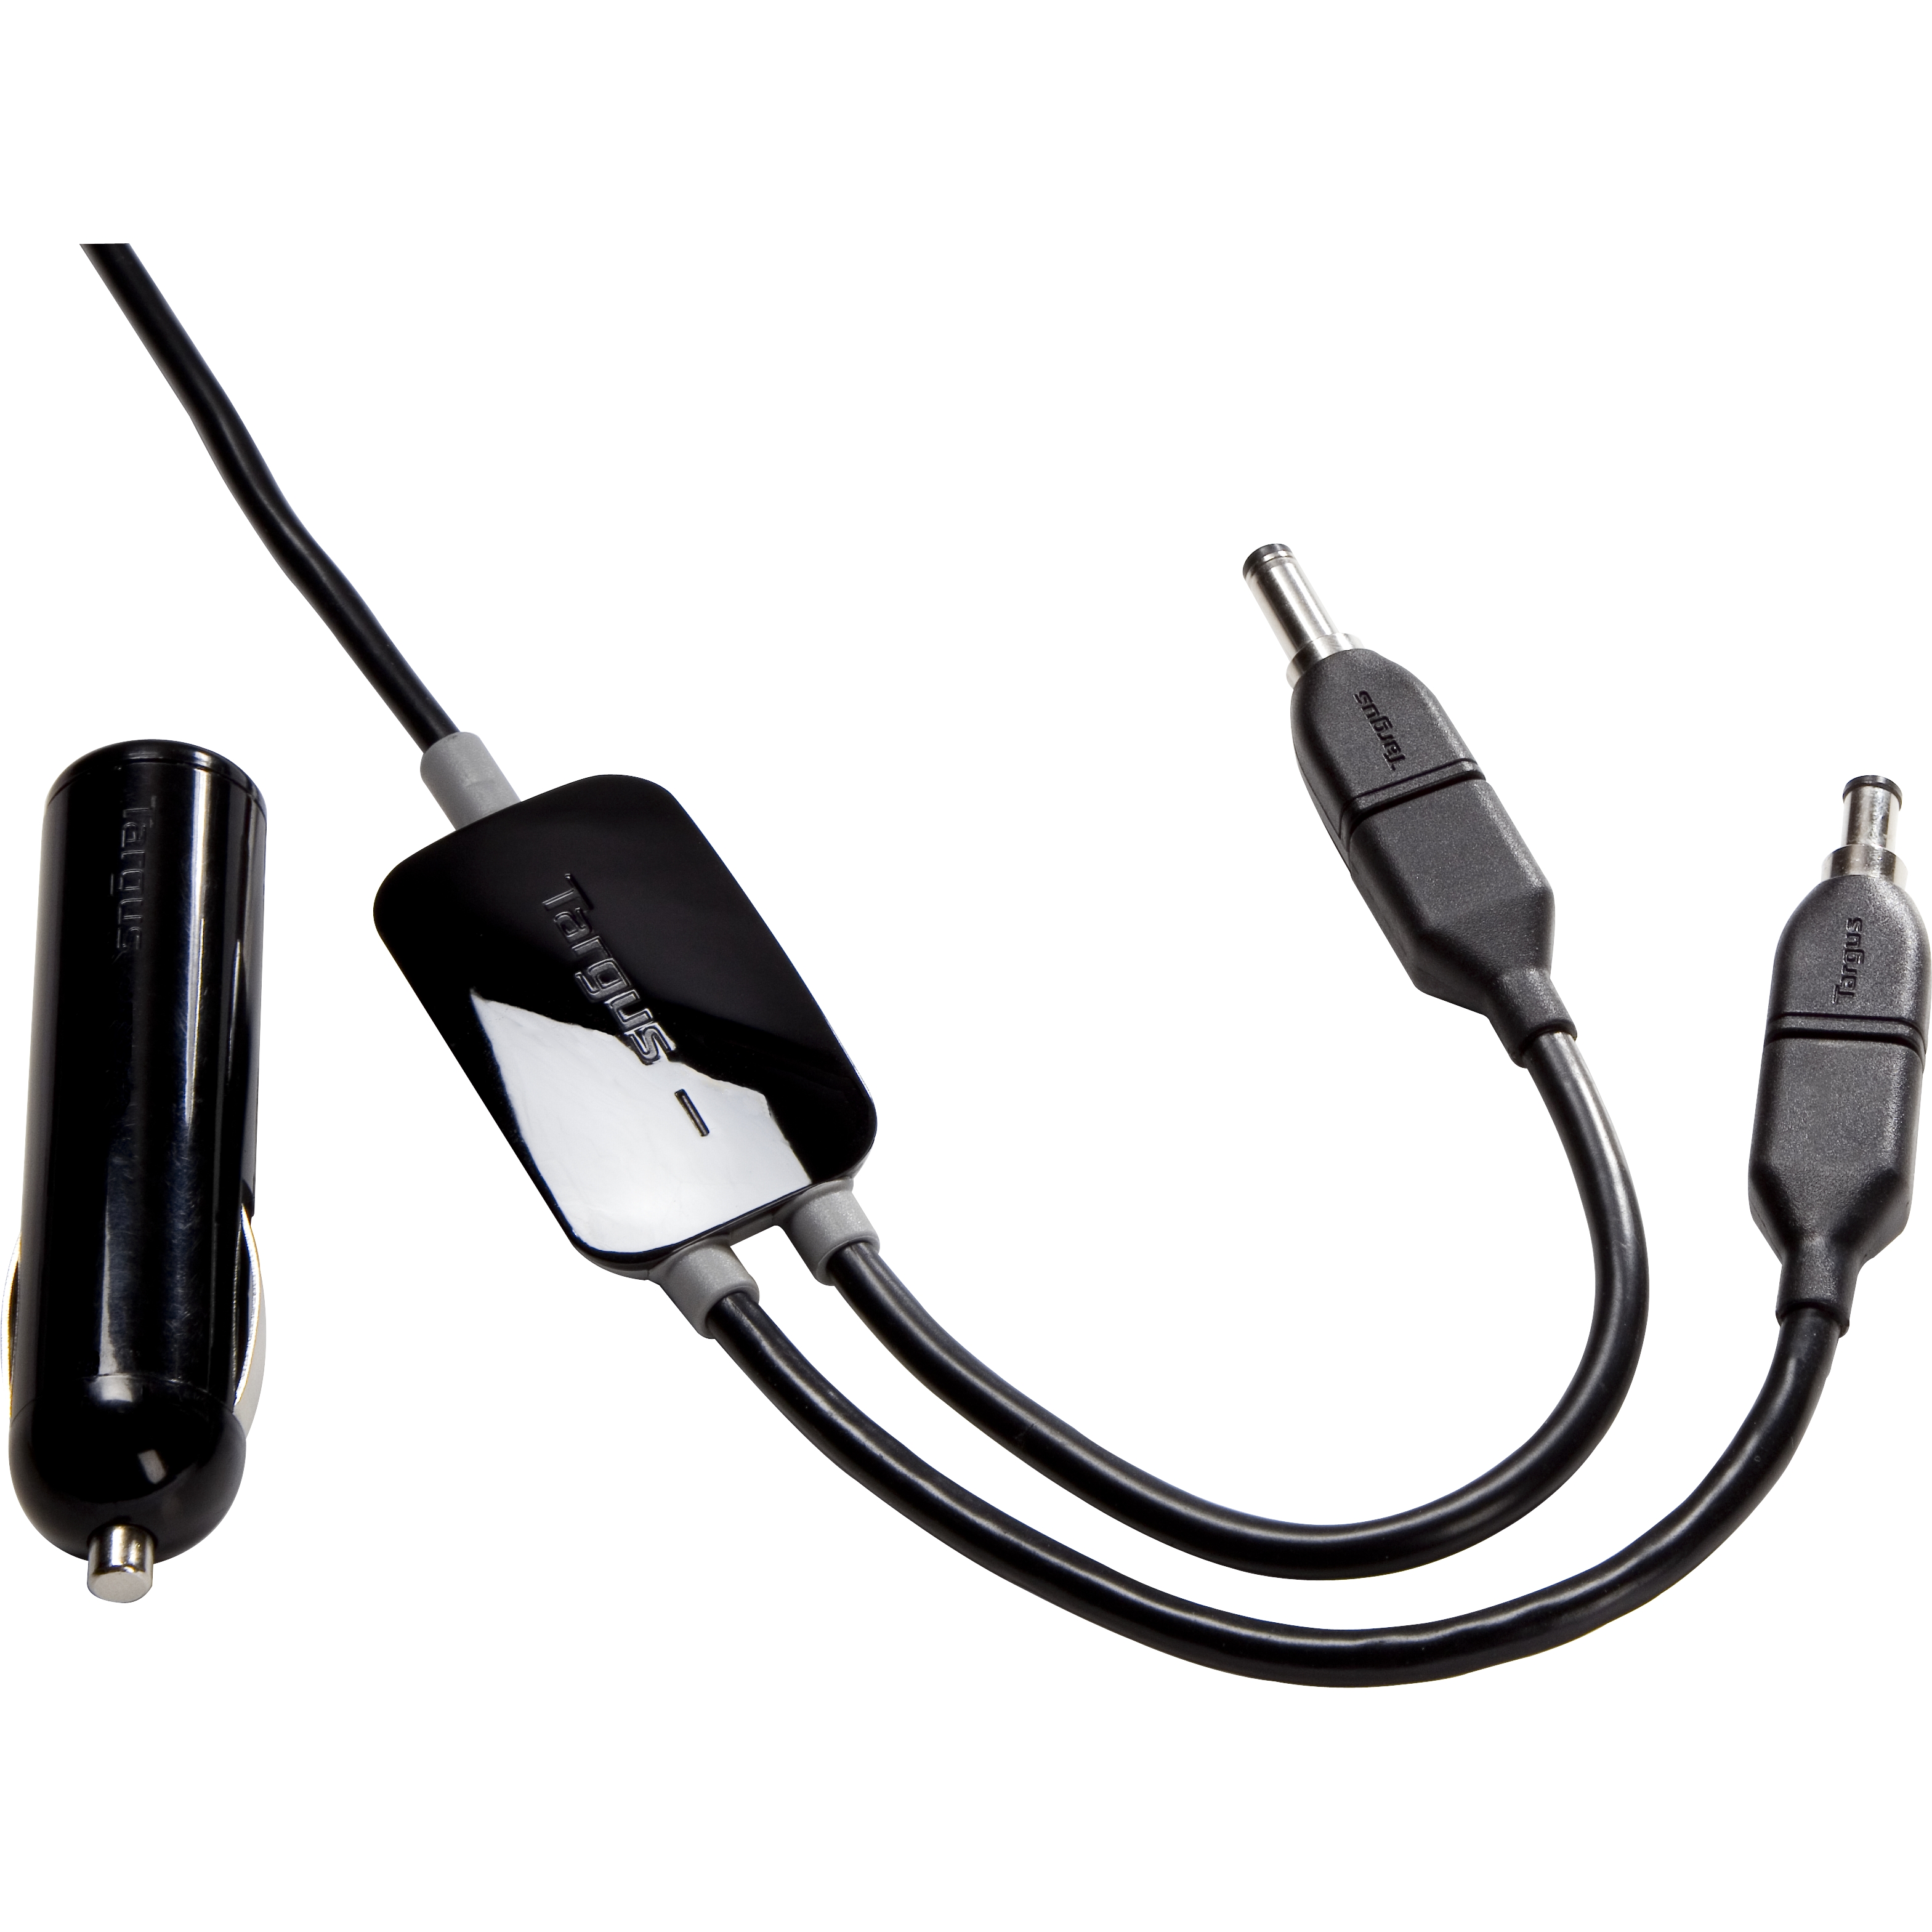 Mobile Laptop Charger (DC) - APD80US - Black: Chargers: Targus